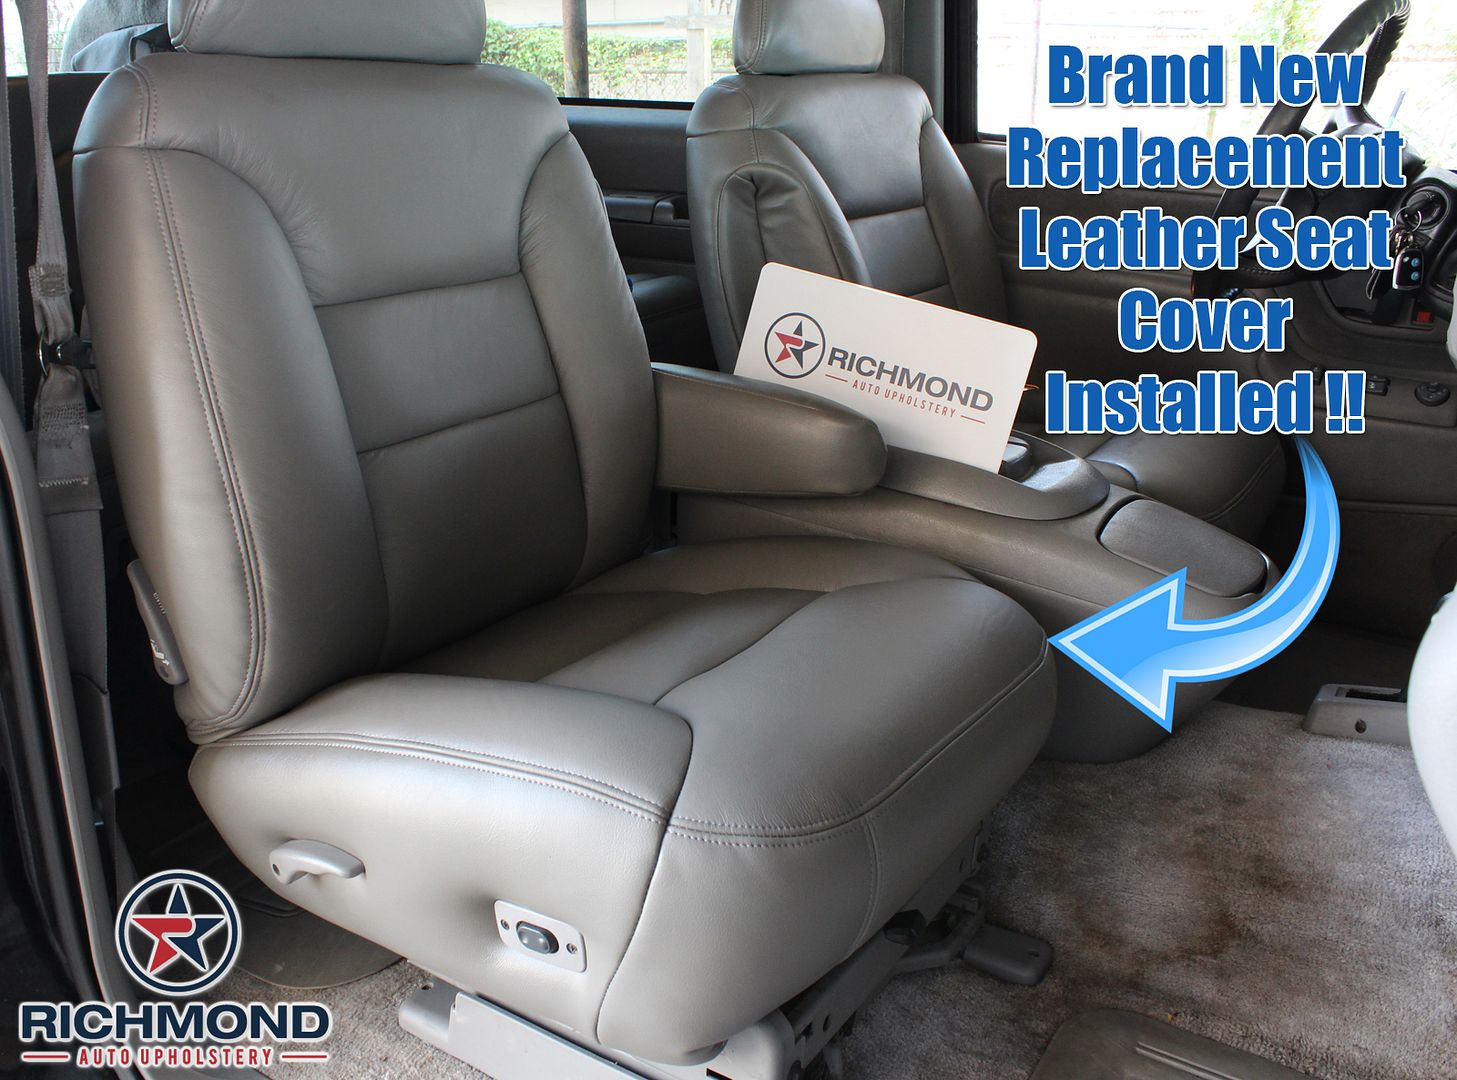 1996 Chevy Tahoe Silverado Driver Lean Back Synthetic Leather Seat Cover Bl...